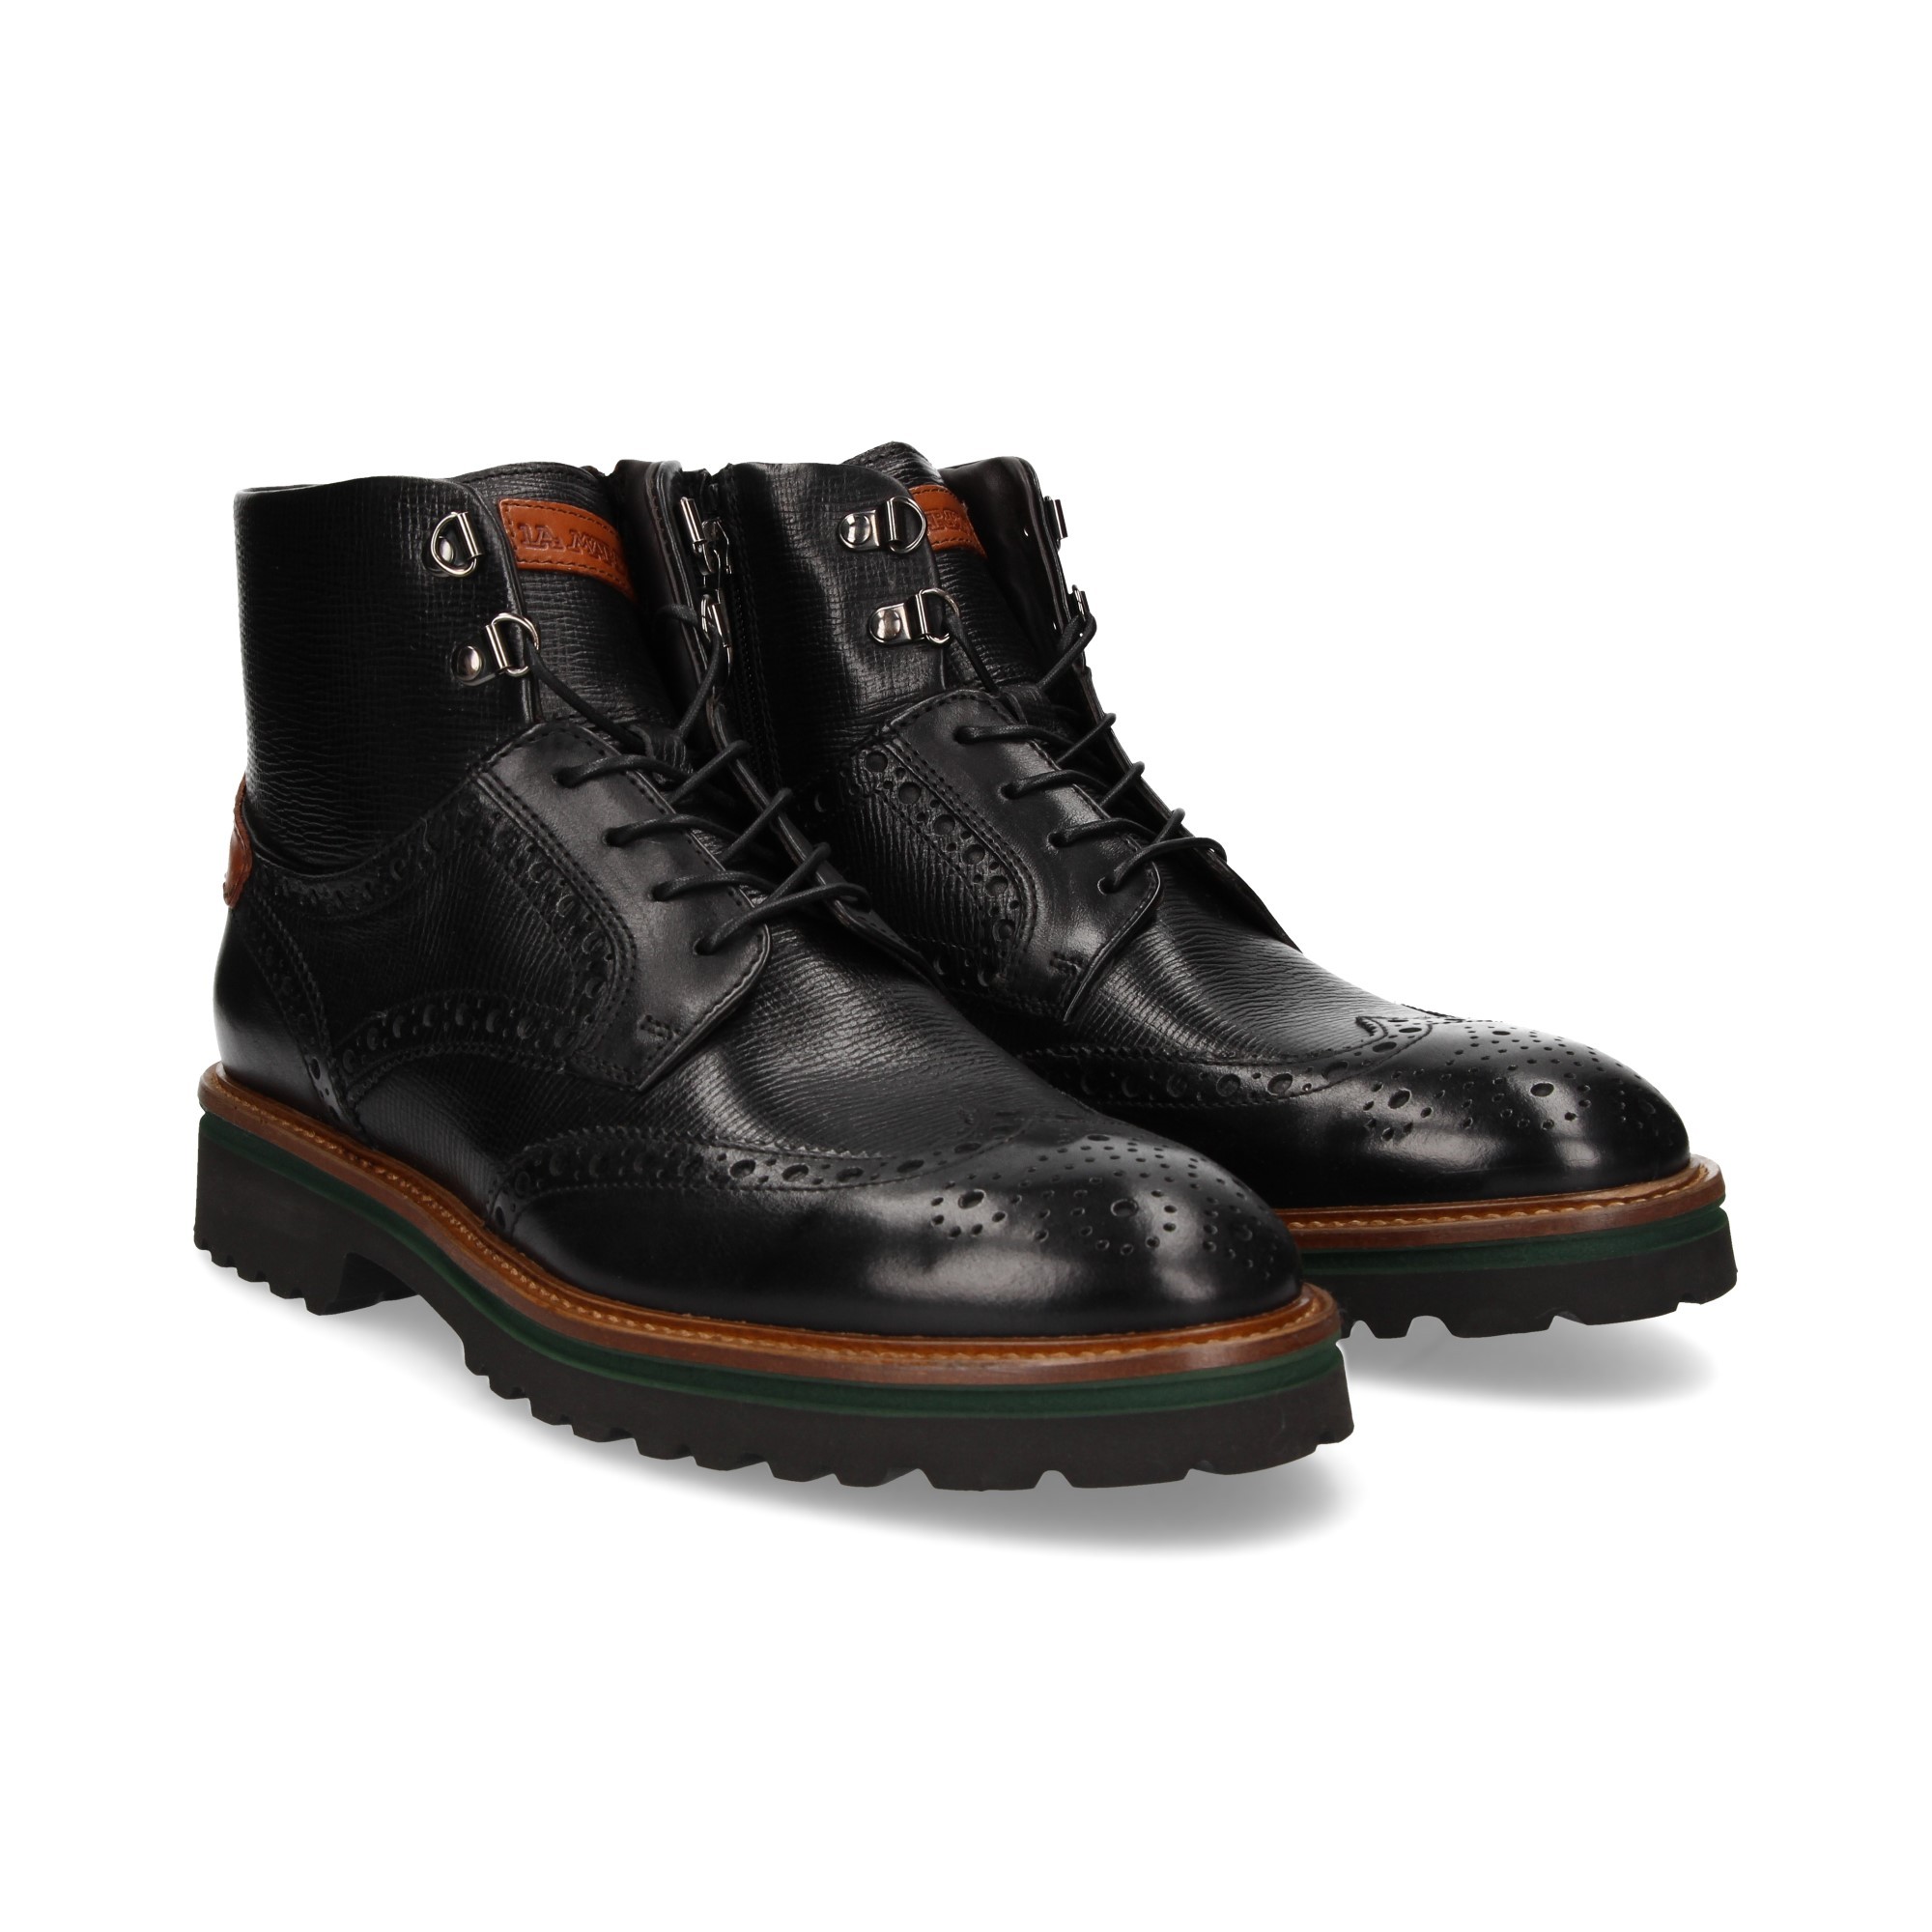 mountain-boot-inside-hair-black-leather-mountain-boot